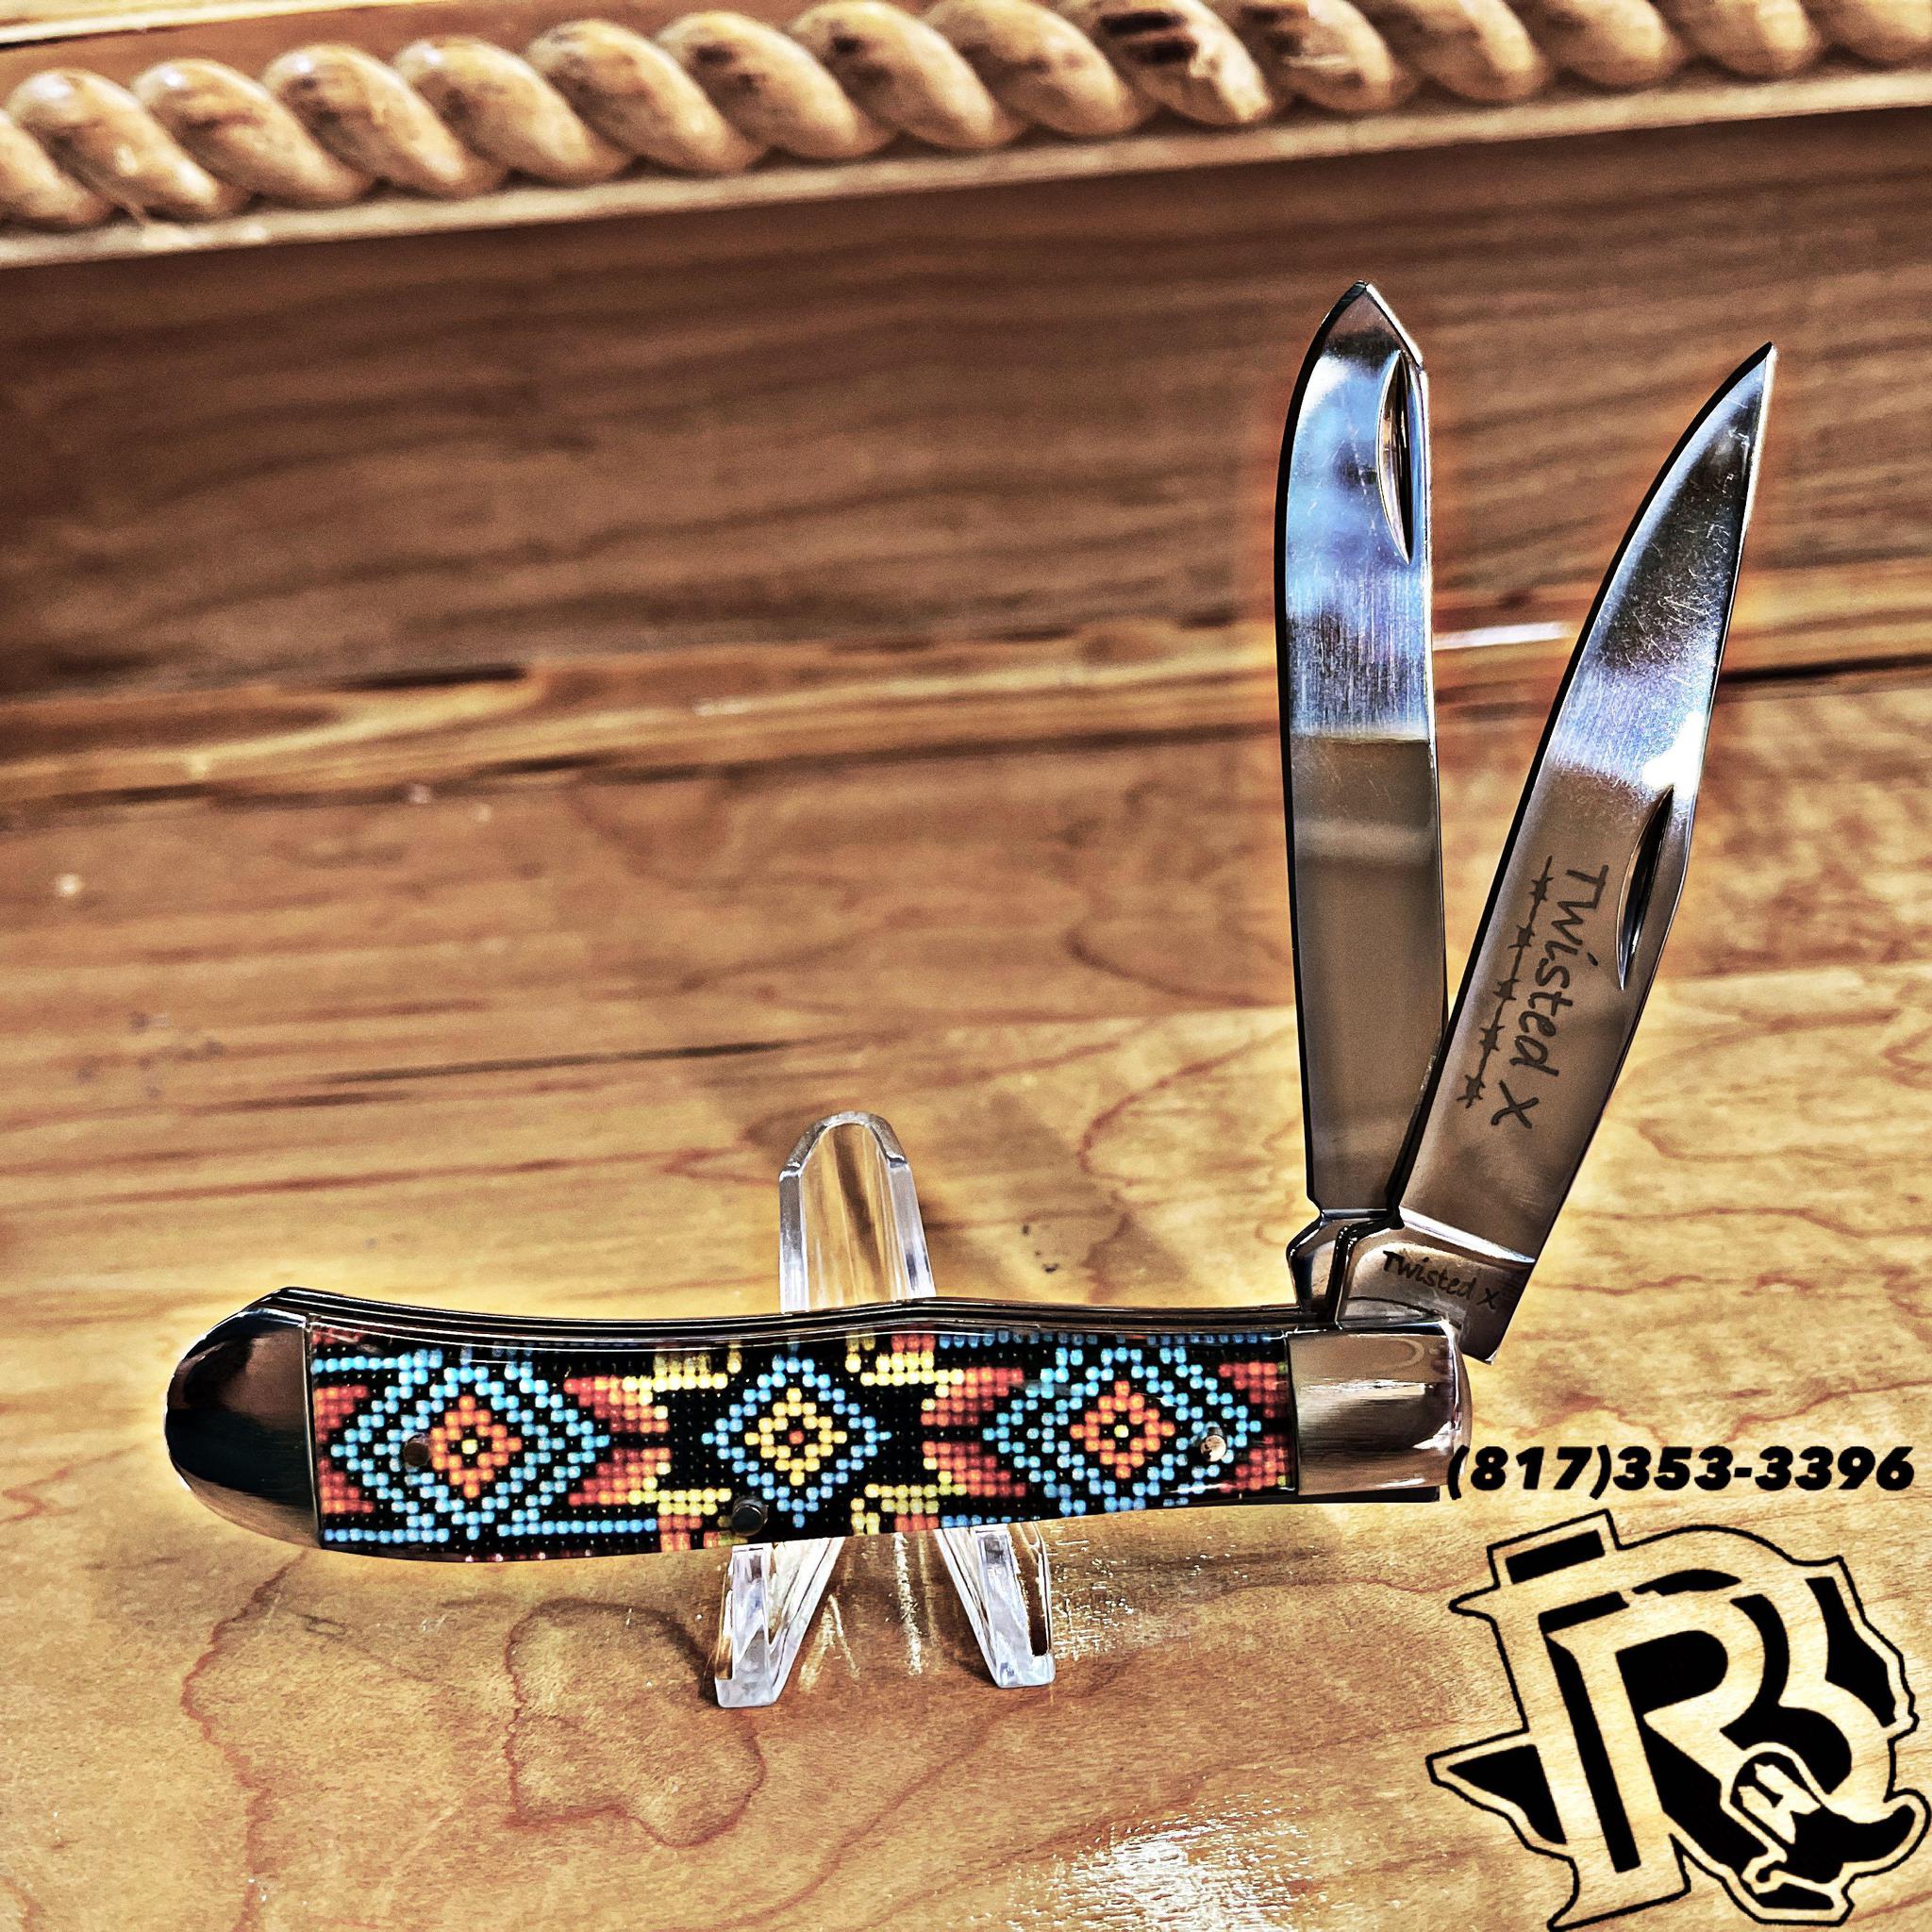 Twisted X KNIFE | 2 blade MULTI COLOR BEADED handle knife XK300